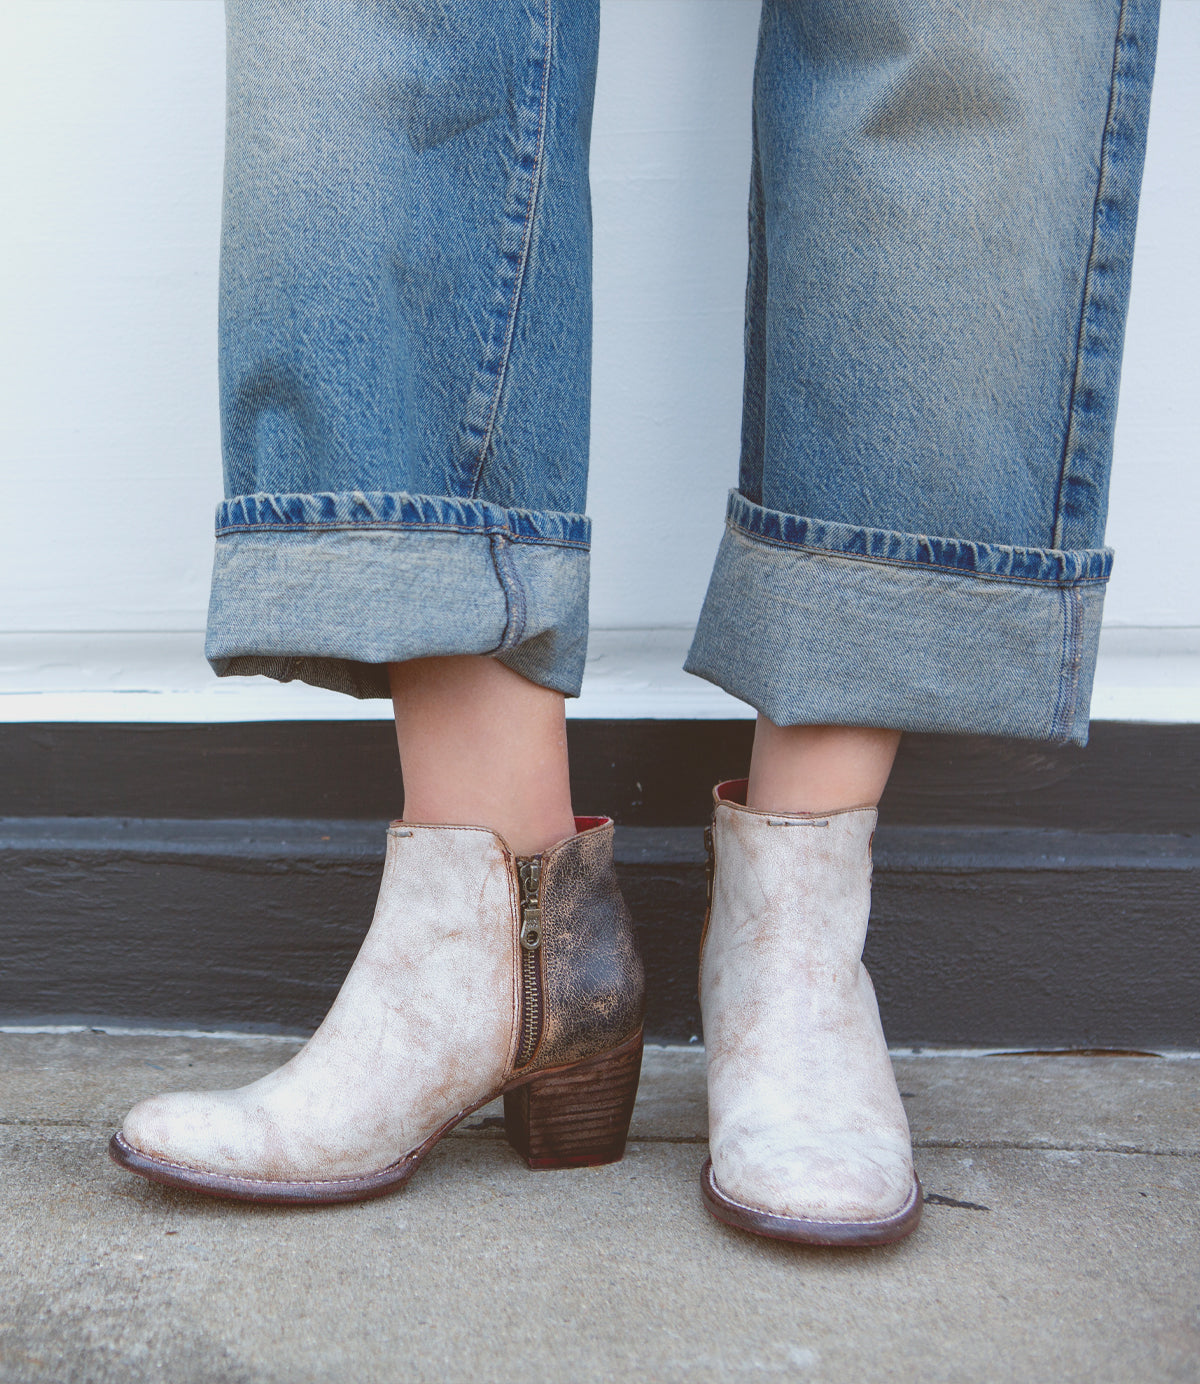 A pair of white, handmade leather boots with distressed ankle design paired with rolled-up denim jeans from Bed Stu's Yell collection.